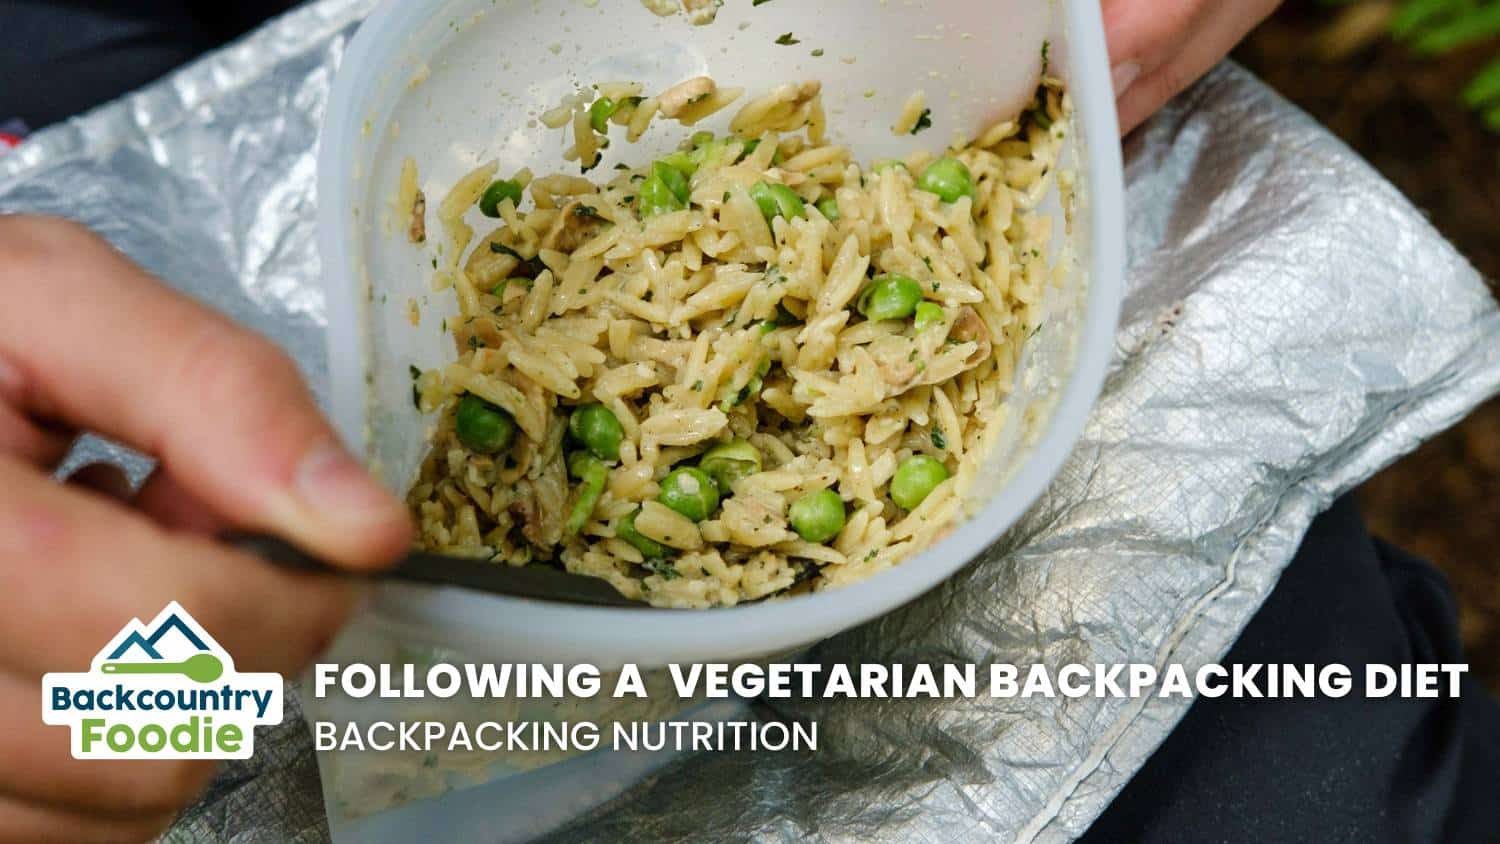 Backcountry Foodie Blog How to Follow a Nutritious Vegetarian Diet Backpacking Nutrition thumbnail